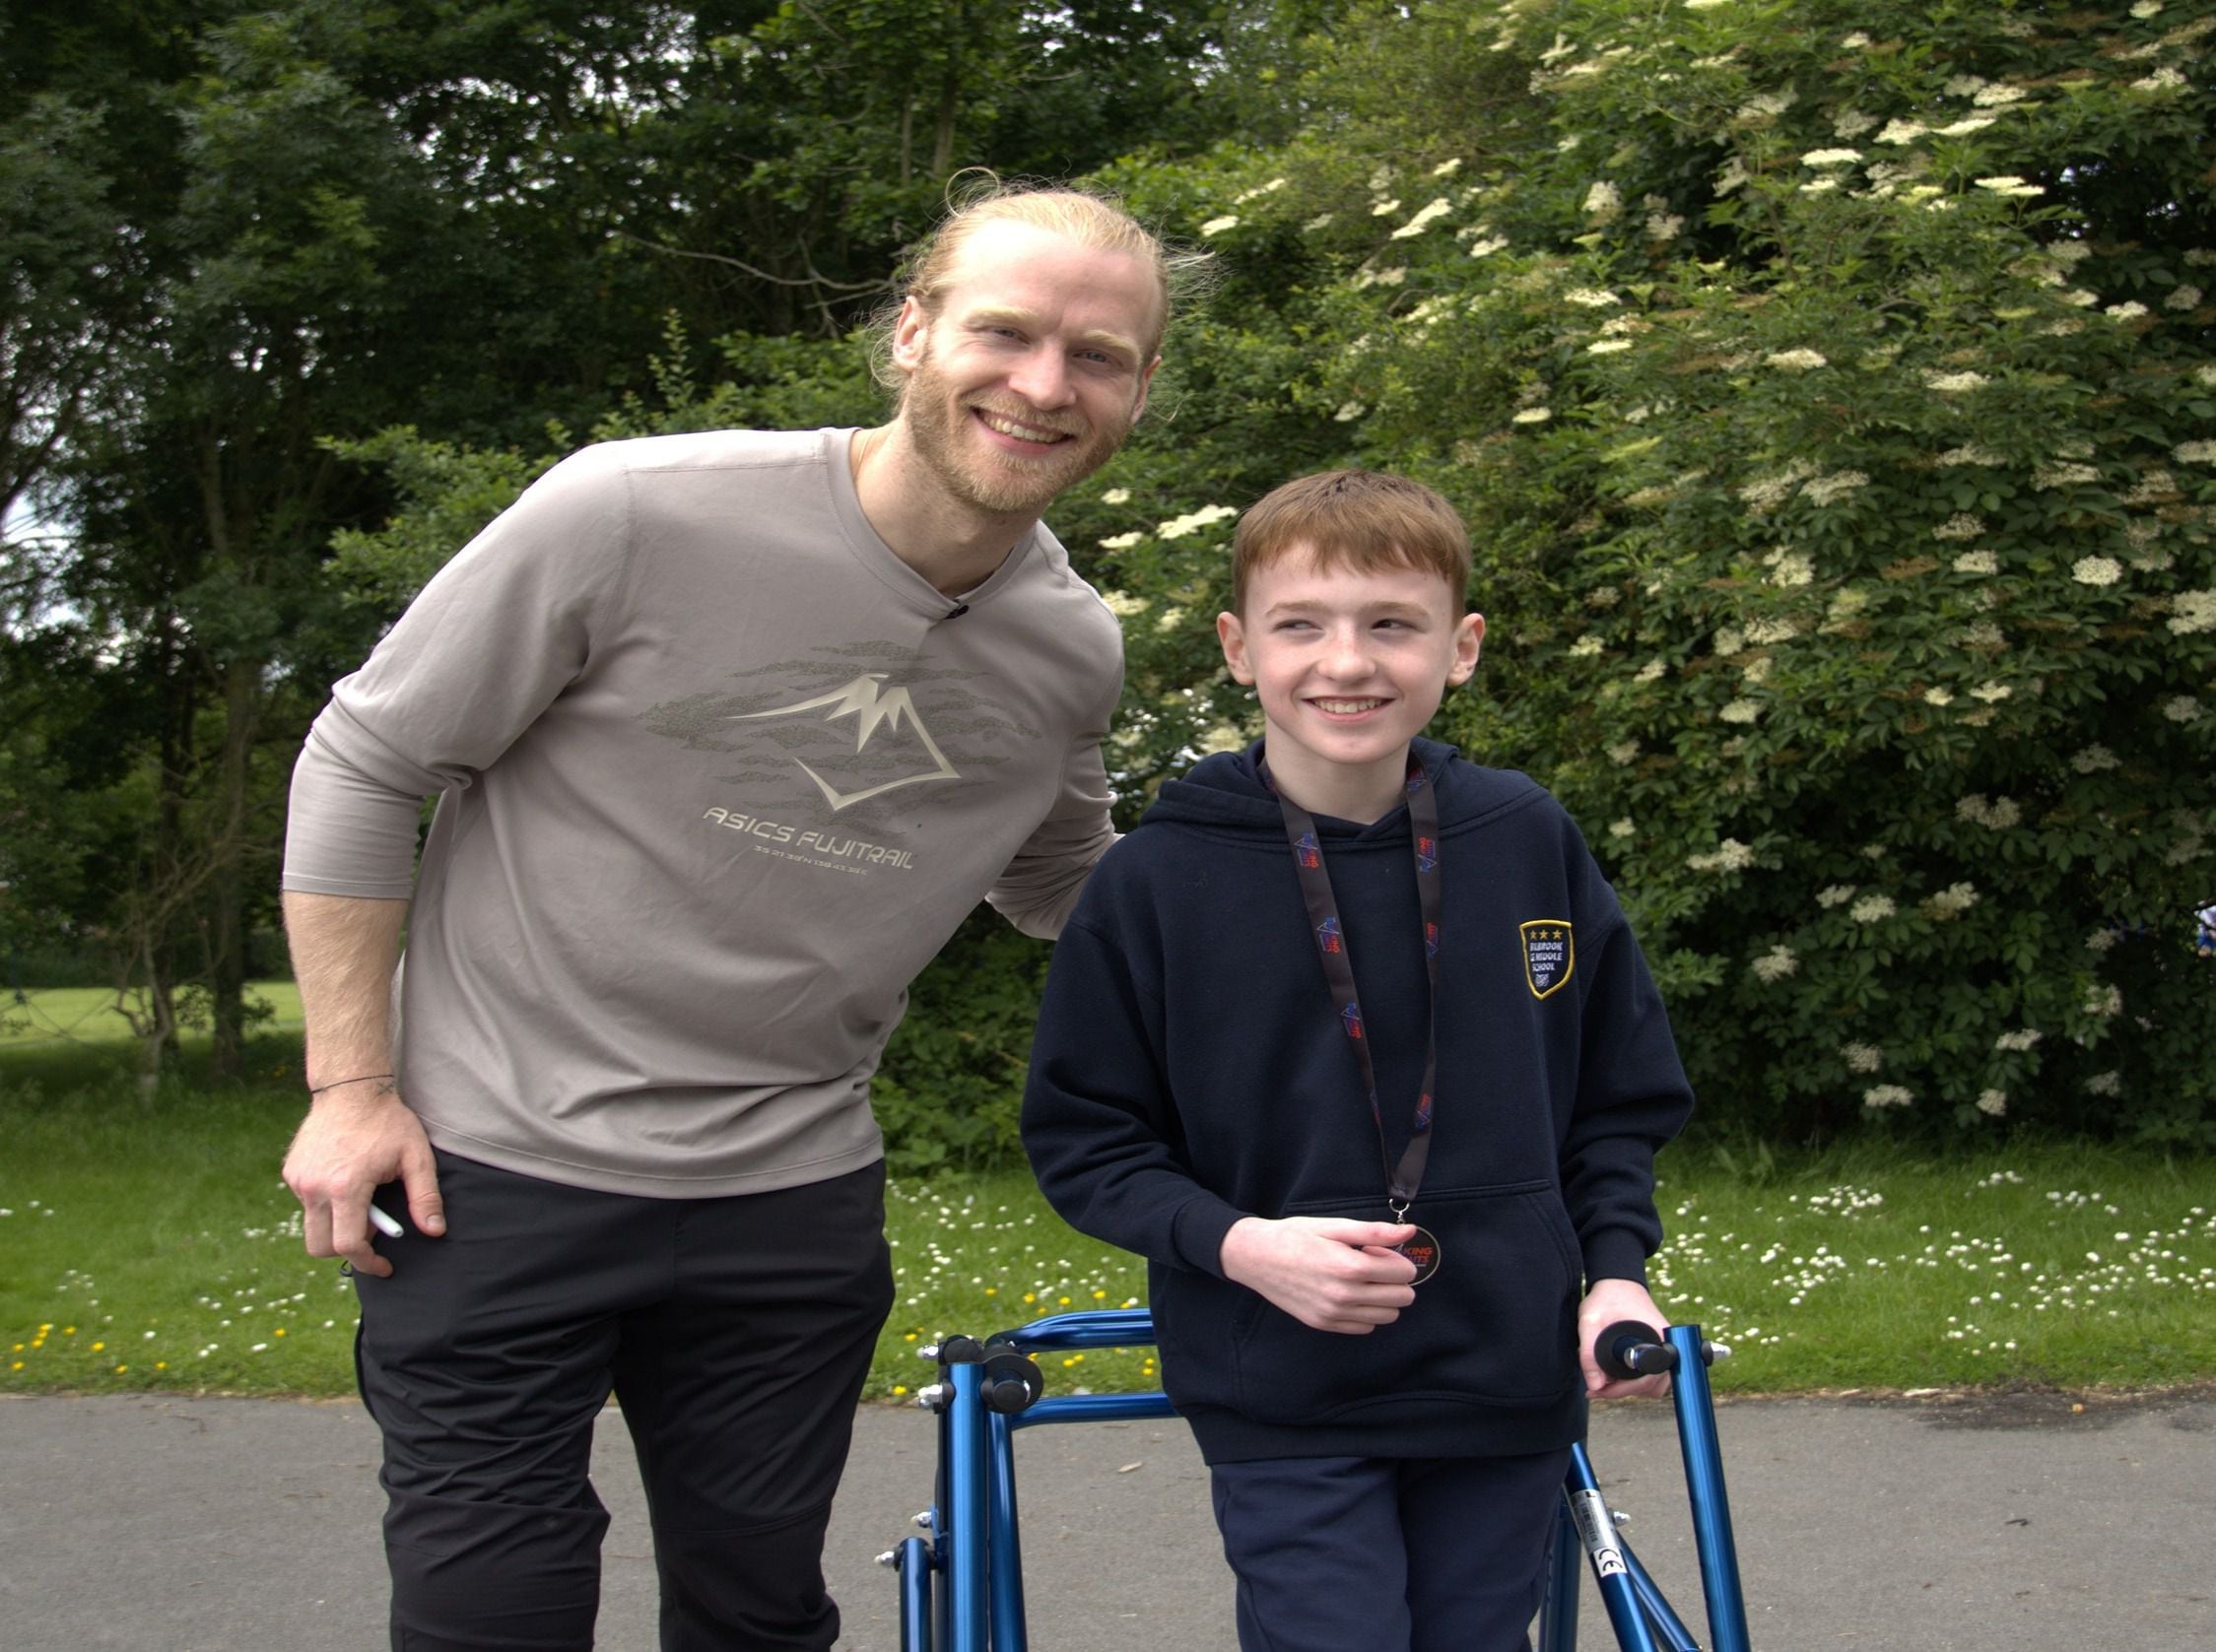 Inspirational day for pupils as gold medal winning Paralympian attends school sports day